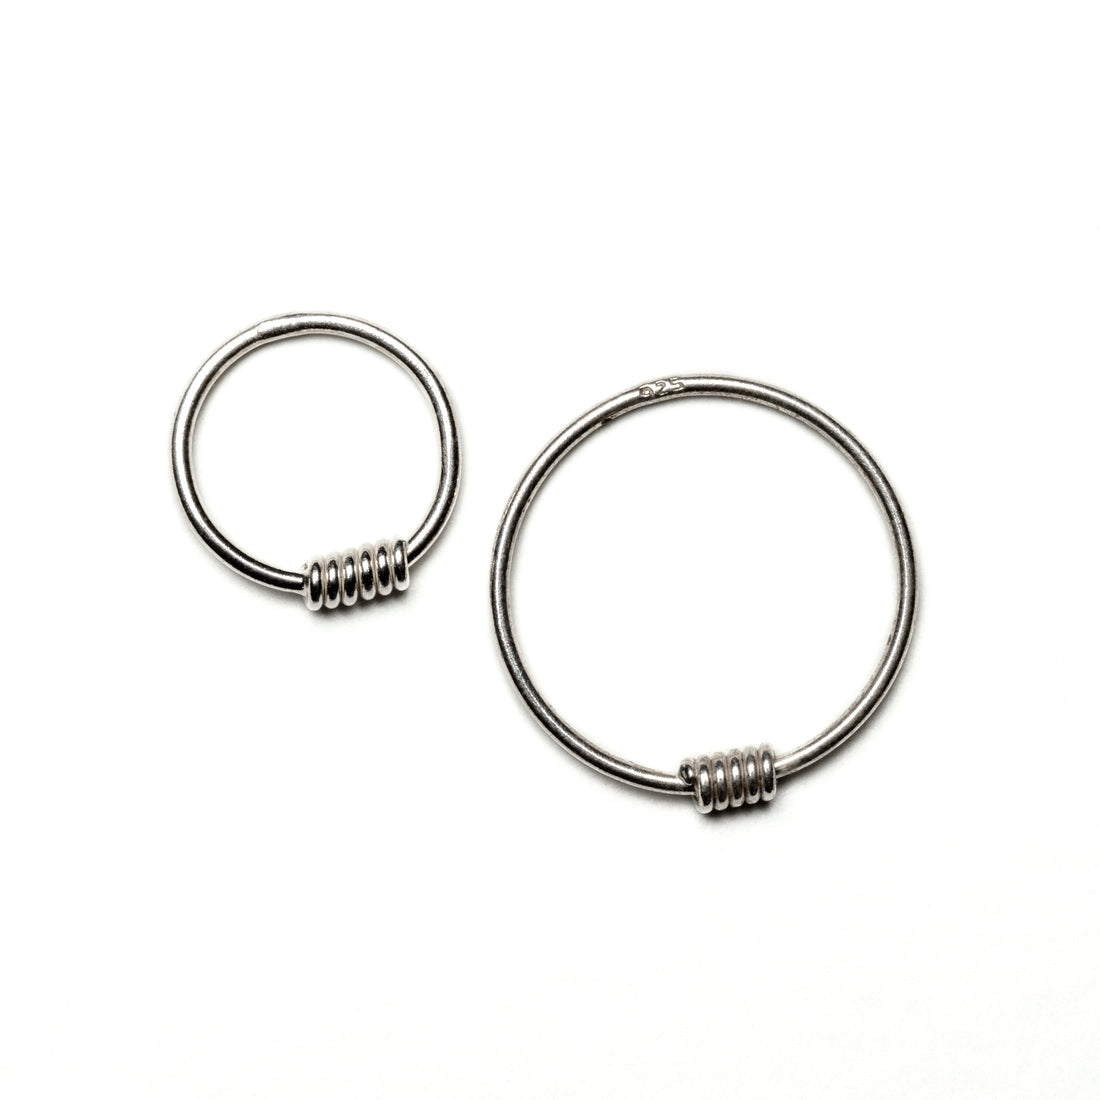 2 sizes of wired silver nose rings frontal view